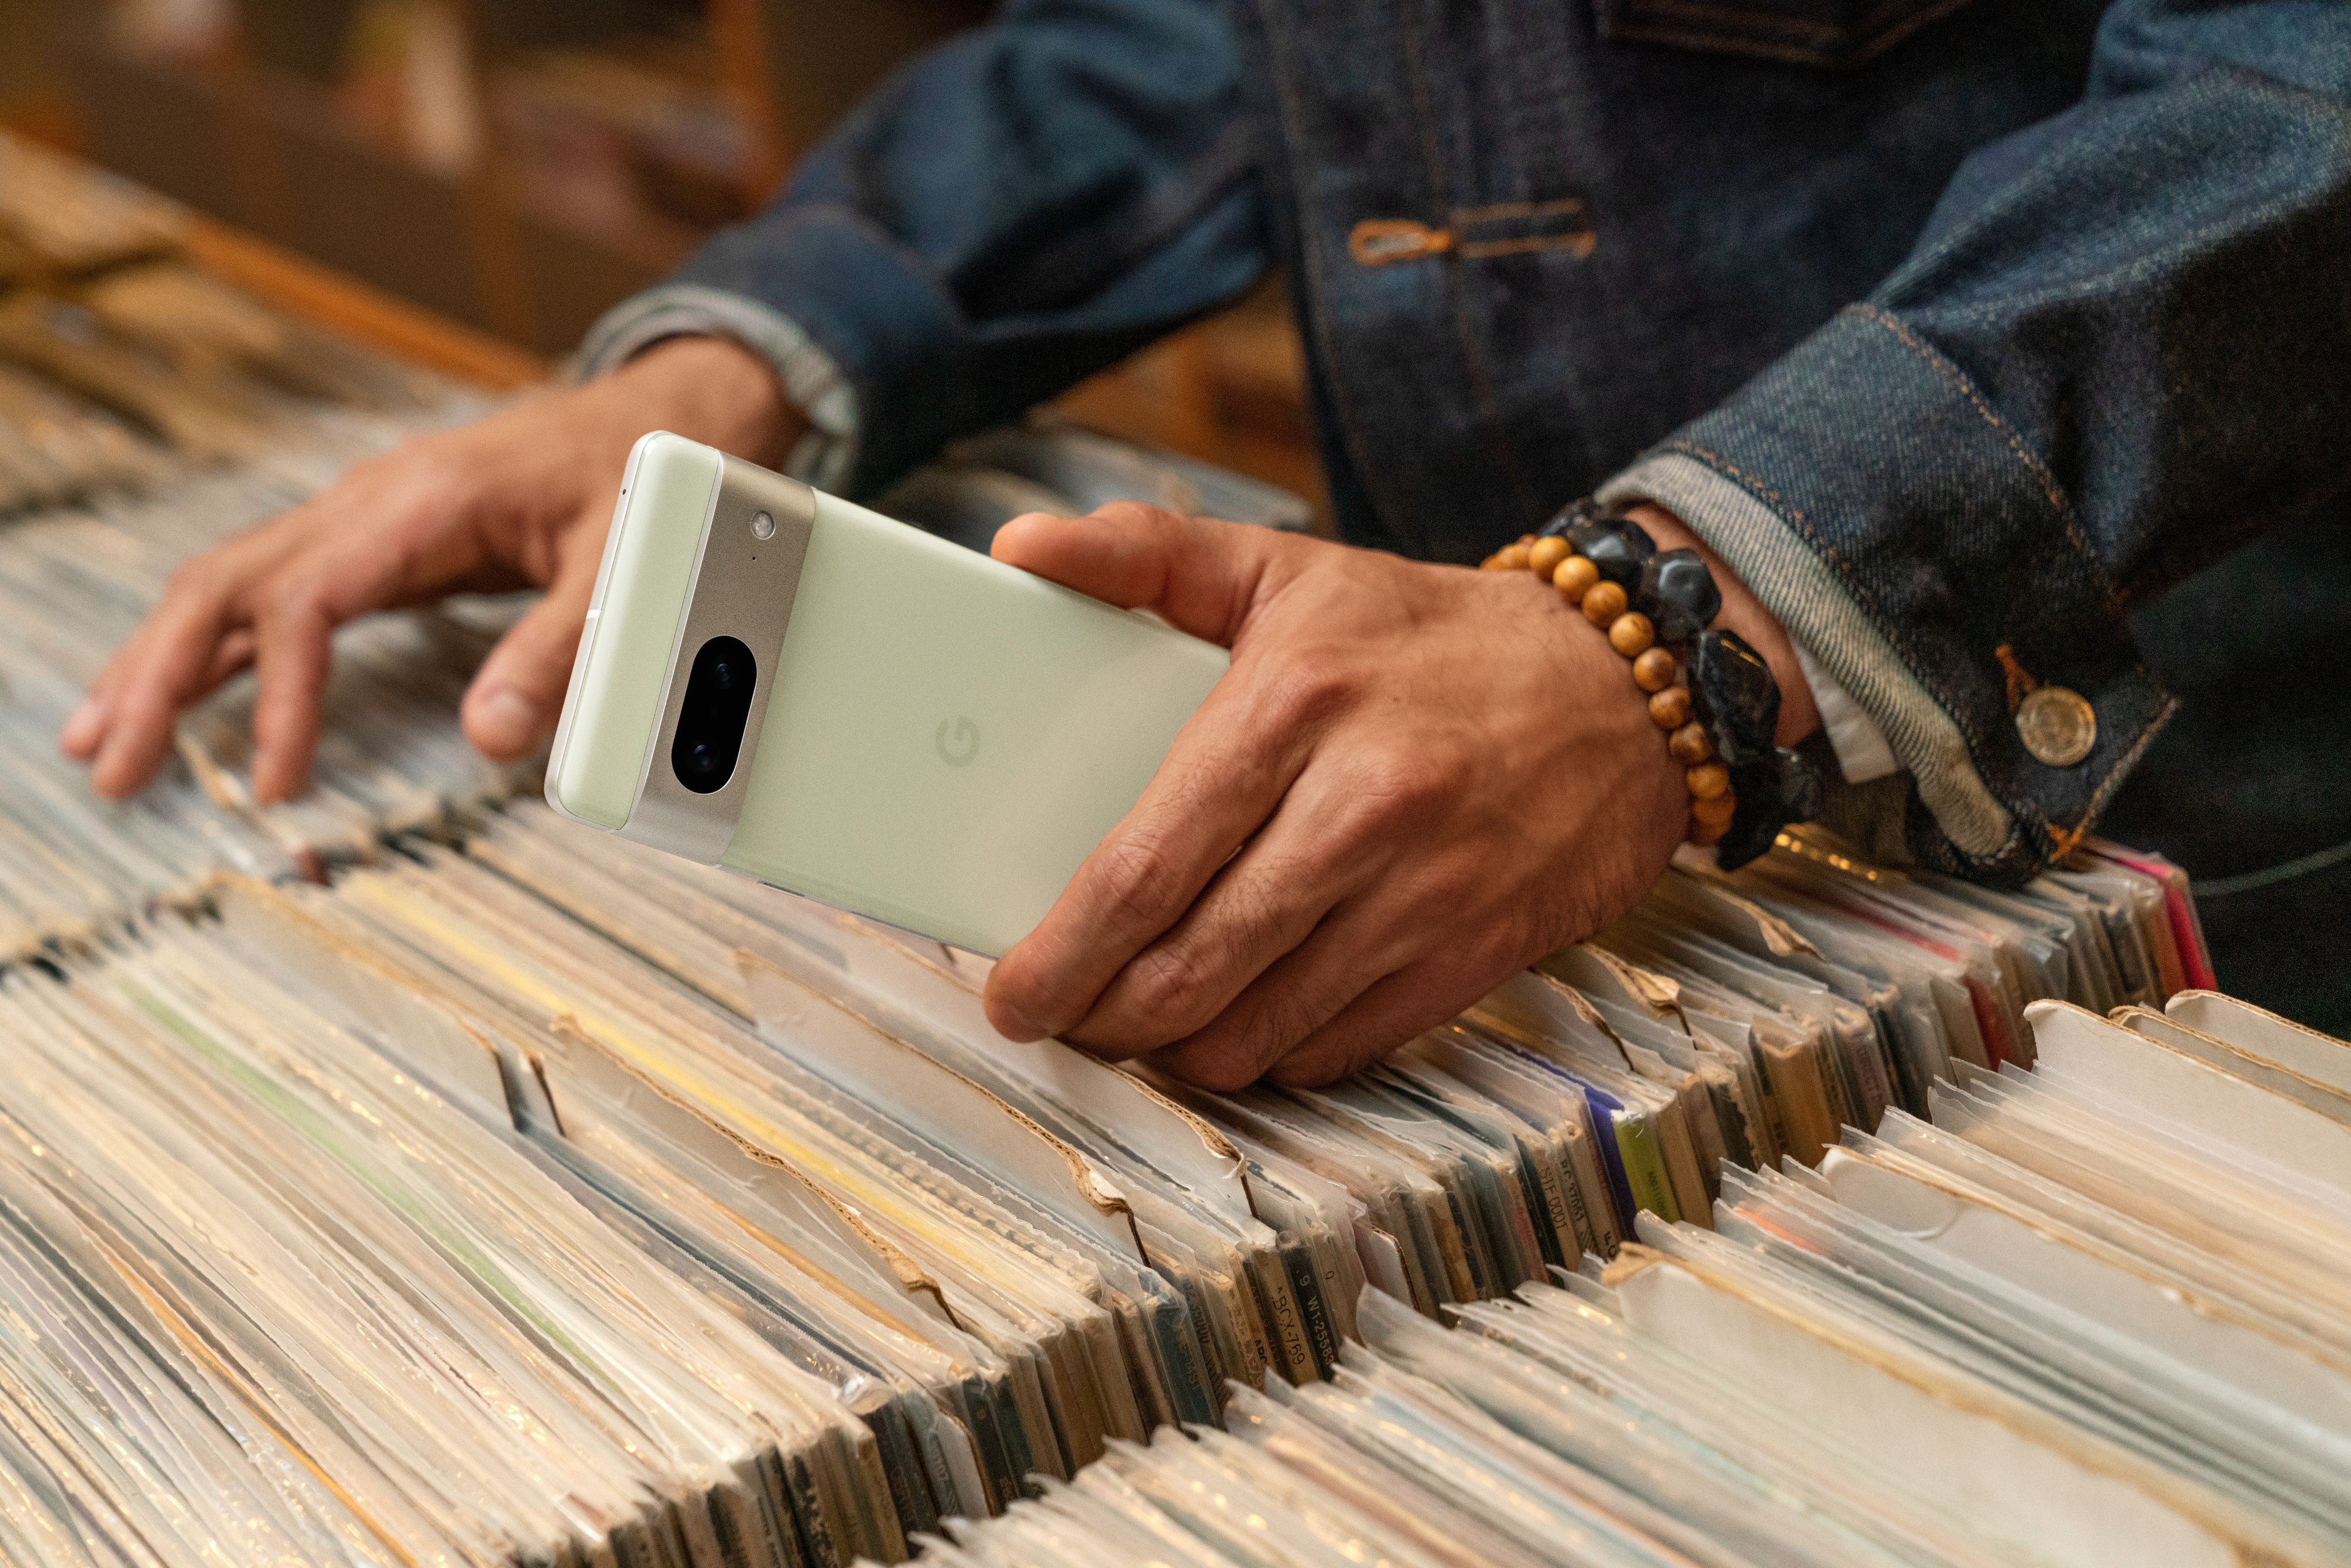 A person browsing through a stack of records and holding a Google Pixel phone